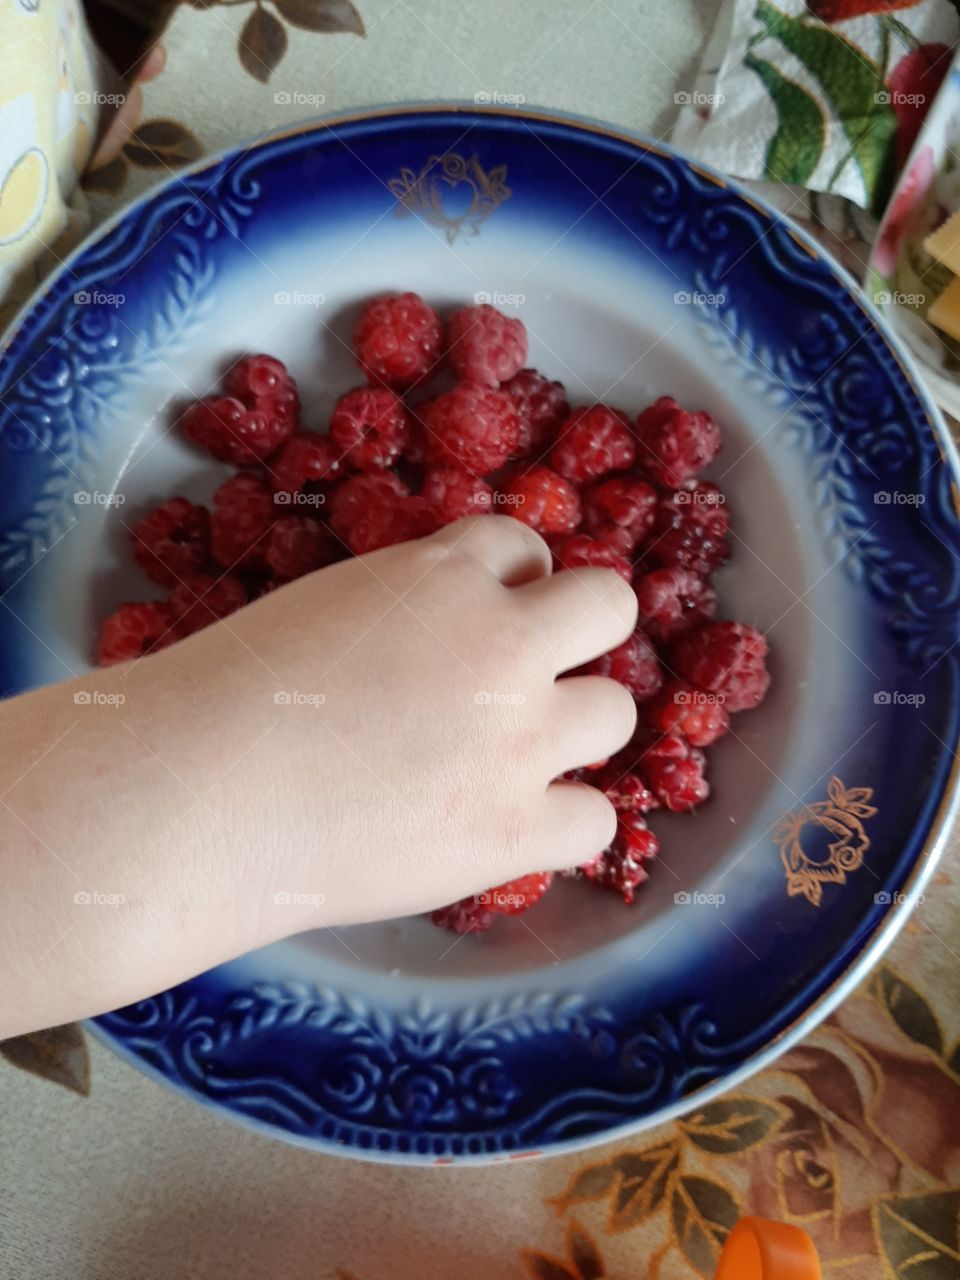 a child's hand reaches for raspberries